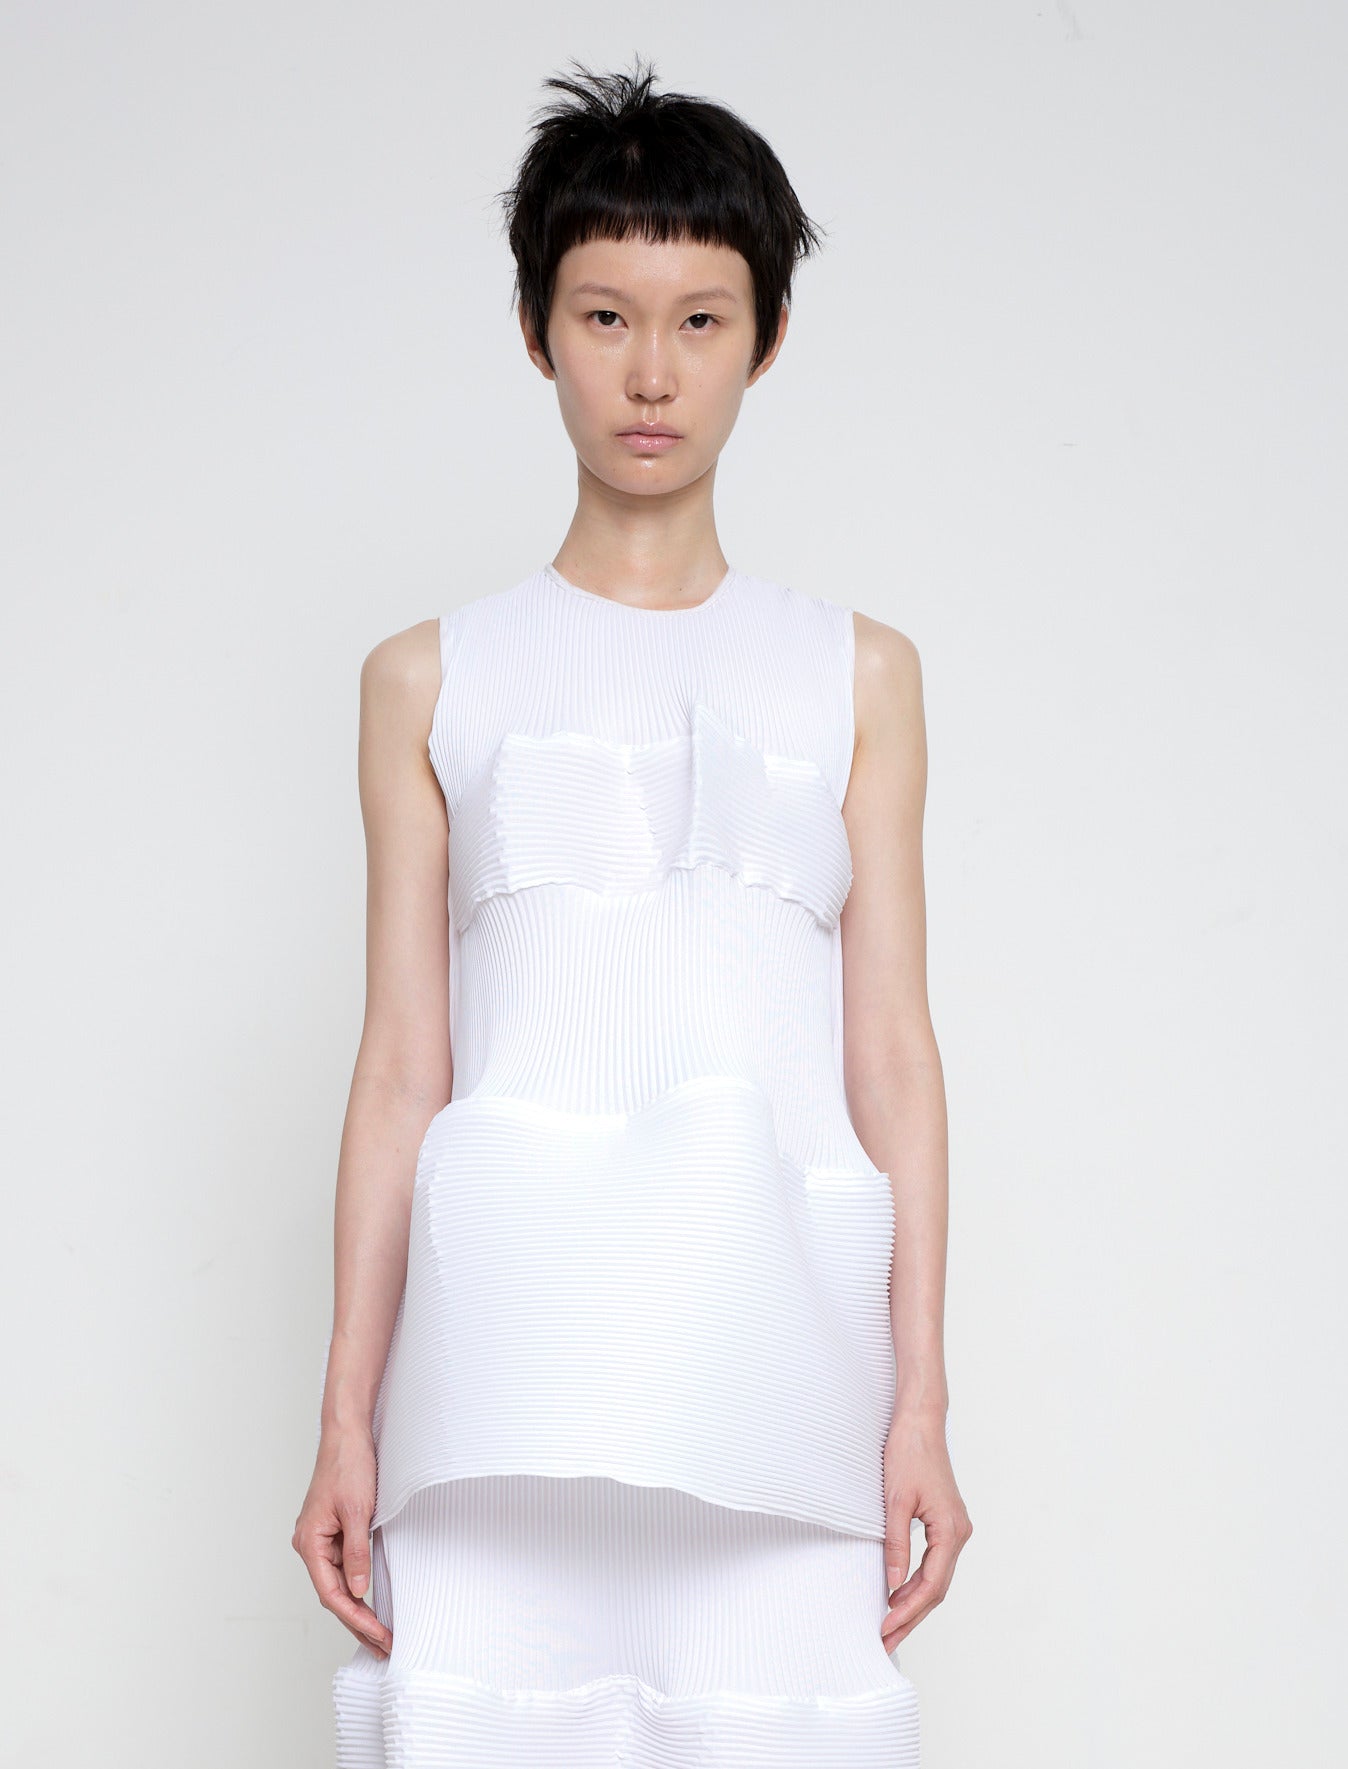 Woman-standing-against-white-background-wearing-Melitta-Baumeister's-white-sleeveless-ripple-top-with-fabric-design-at-the-chest-and-bottom